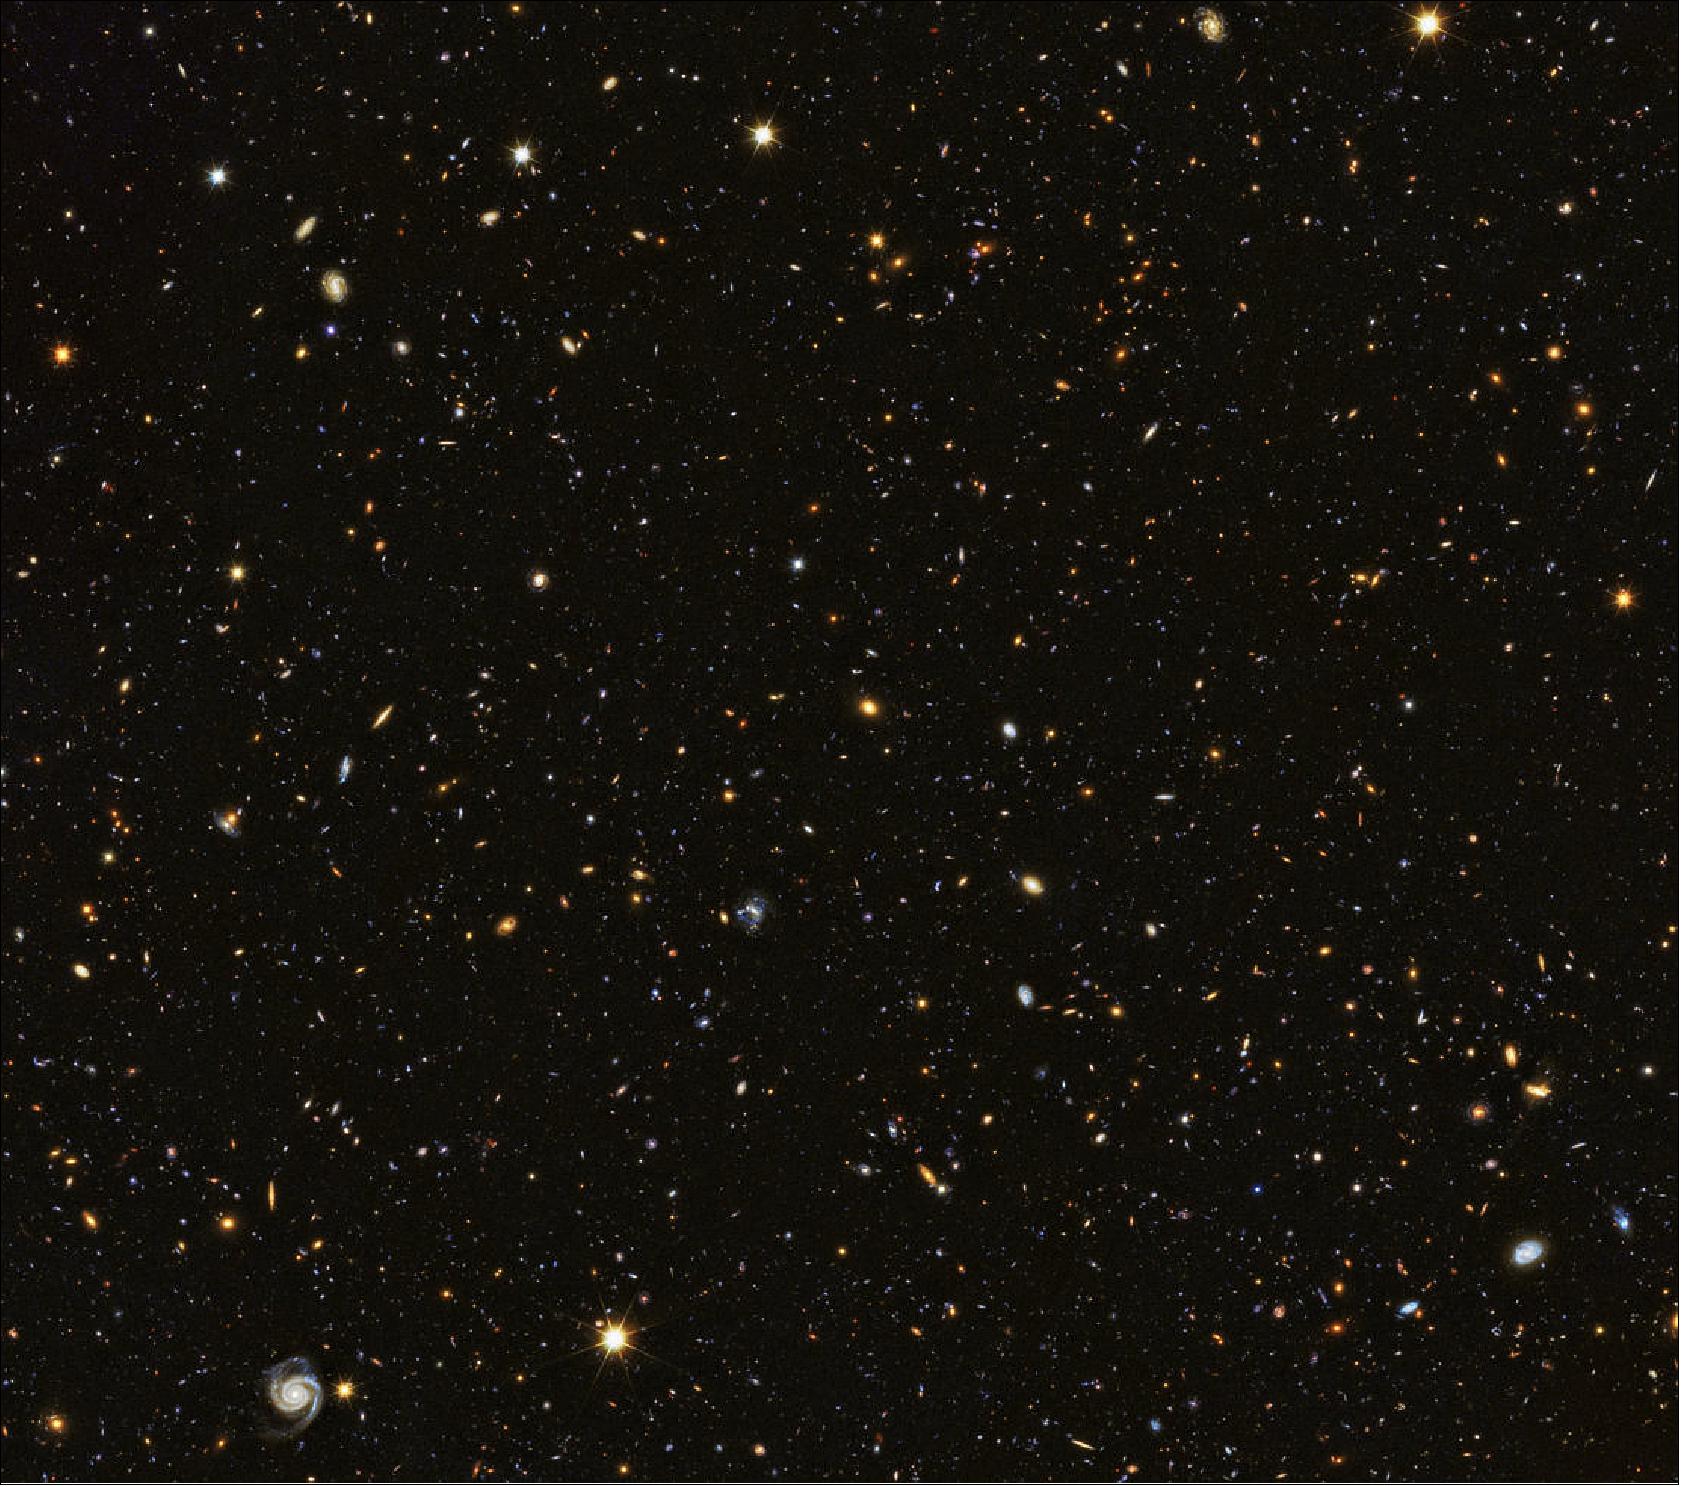 Figure 26: Astronomers have just assembled one of the most comprehensive portraits yet of the universe’s evolutionary history, based on a broad spectrum of observations by the Hubble Space Telescope and other space and ground-based telescopes. In particular, Hubble’s ultraviolet vision opens a new window on the evolving universe, tracking the birth of stars over the last 11 billion years back to the cosmos’ busiest star-forming period, about 3 billion years after the big bang. This photo encompasses a sea of approximately 15,000 galaxies — 12,000 of which are star-forming — widely distributed in time and space. This mosaic is 14 times the area of the Hubble Ultra Violet Ultra Deep Field released in 2014 [image credit: NASA, ESA, P. Oesch (University of Geneva), and M. Montes (University of New South Wales)]